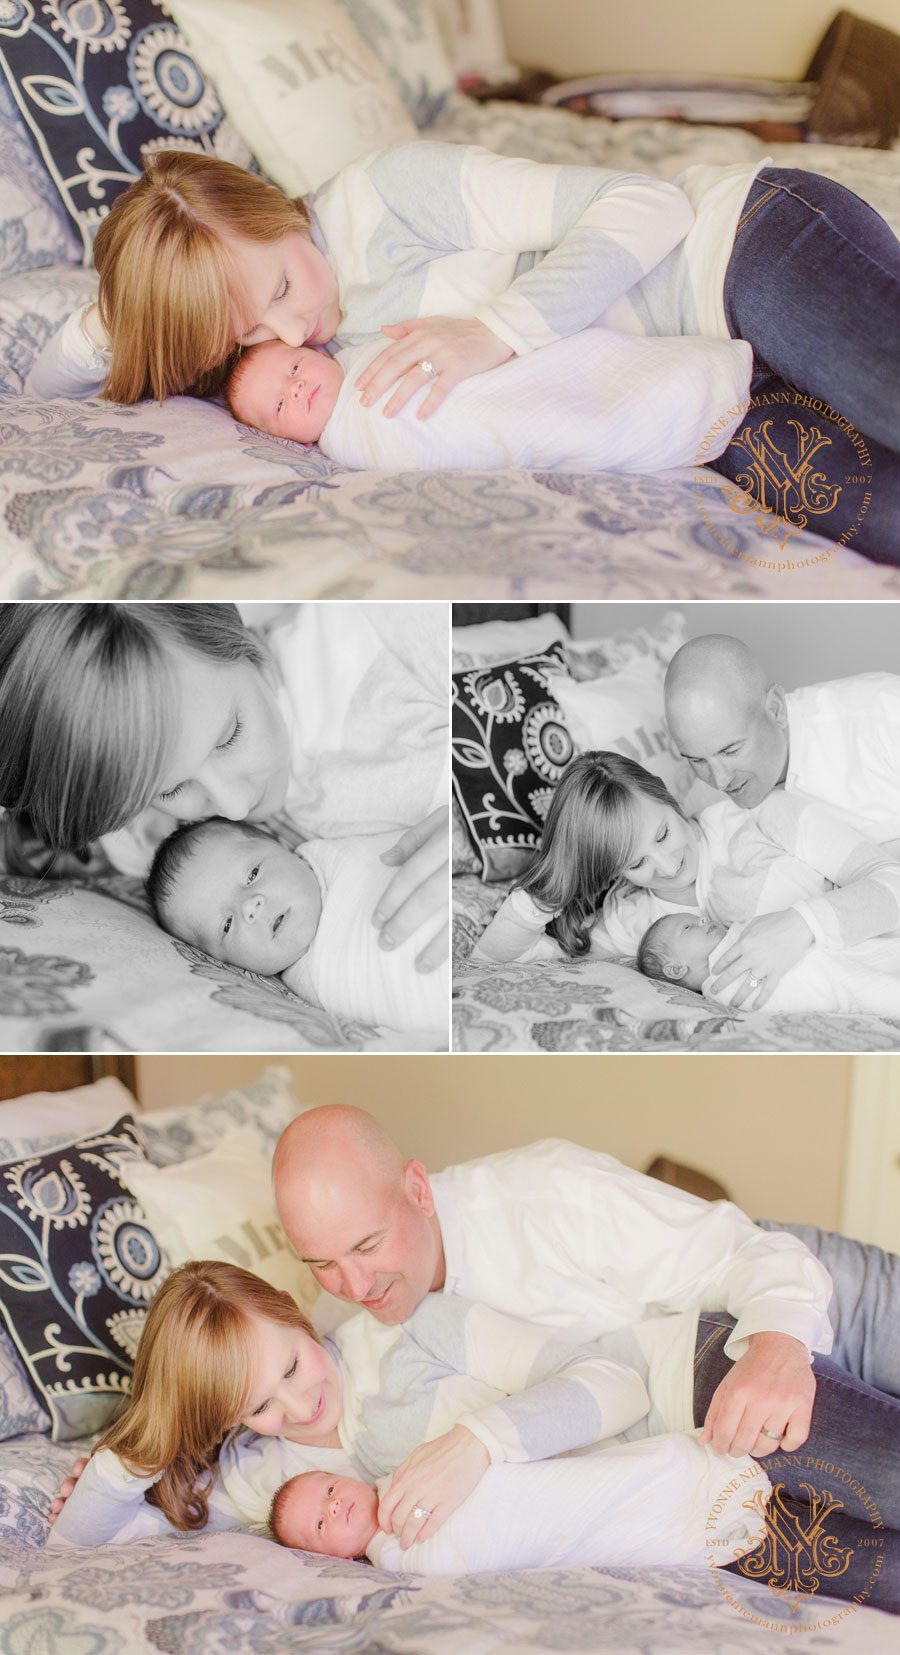 Lifestyle infant photography on-location at family home in Watkinsville, GA.